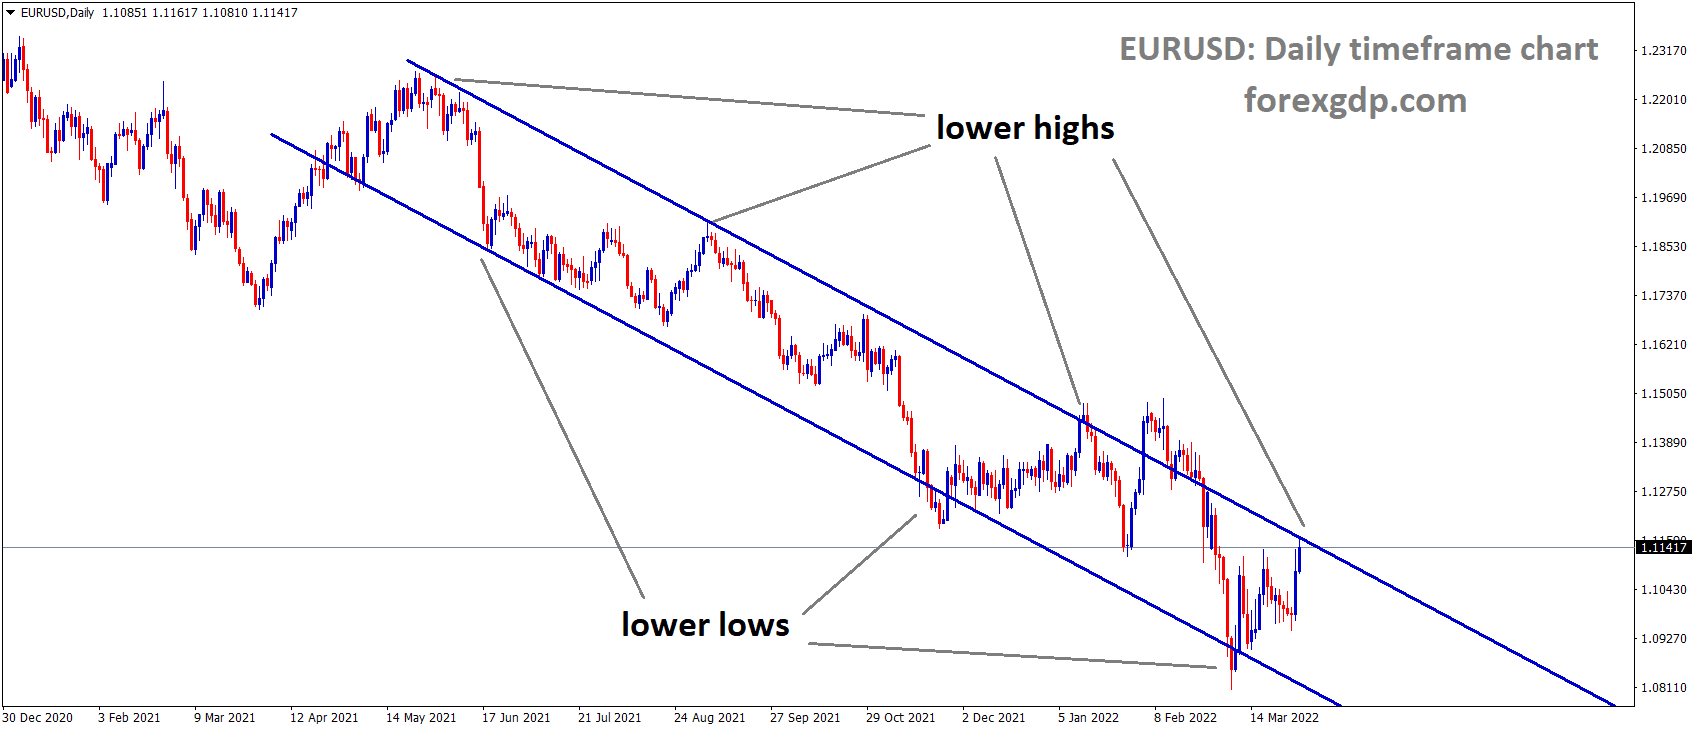 EURUSD Daily Time Frame Market has reached the Lower high area of the Descending channel